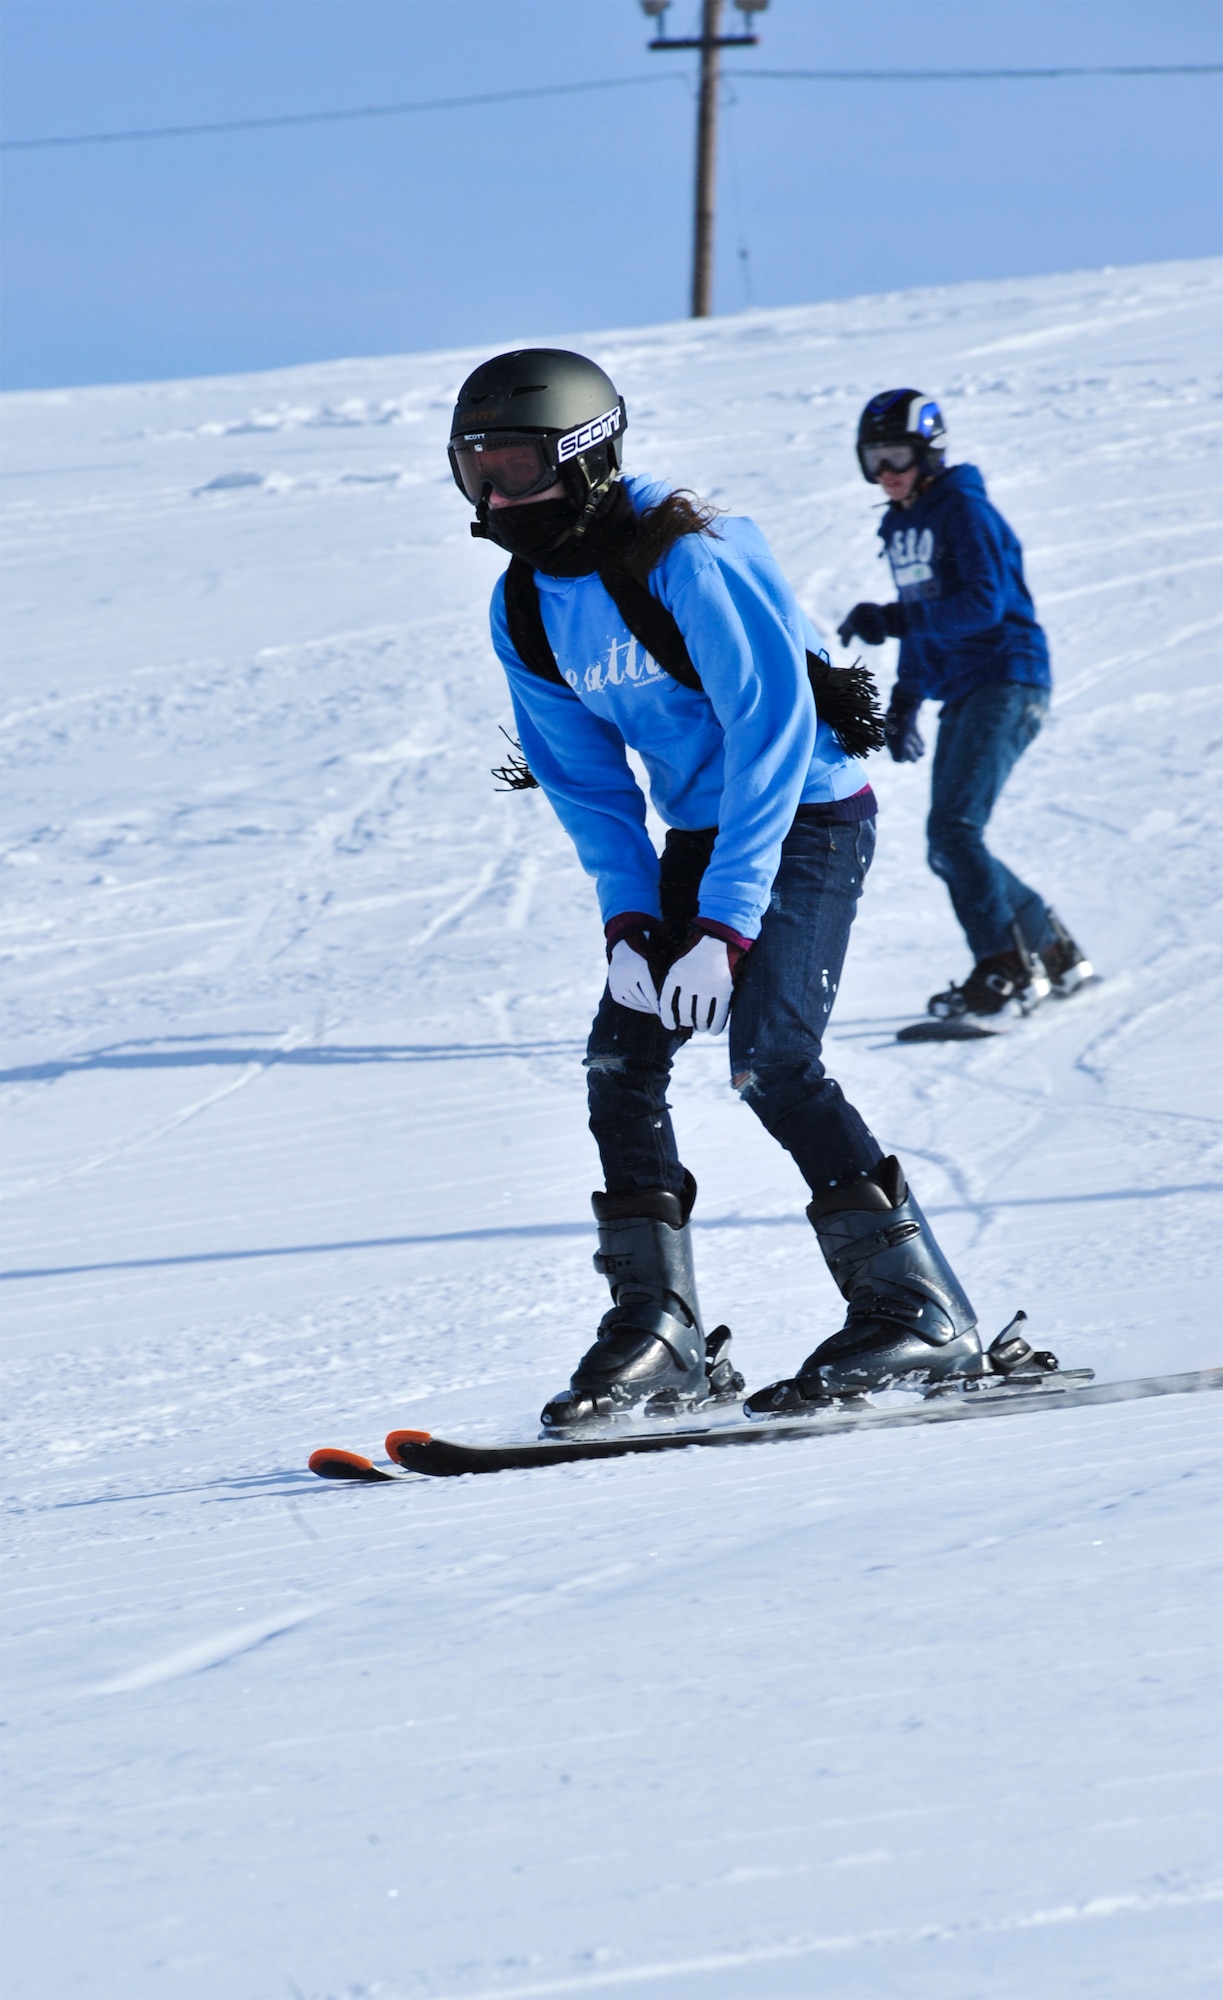 ELMENDORF AIR FORCE BASE, Alaska – Two children make their way down Elmendorf’s Hillberg on skis and a snowboard March 11. March 8-12 was spring break for most of the schools in and around Elmendorf, giving children and their parents the opportunity to get out and enjoy themselves. (Air Force photo/Airman 1st Class Christopher Gross)